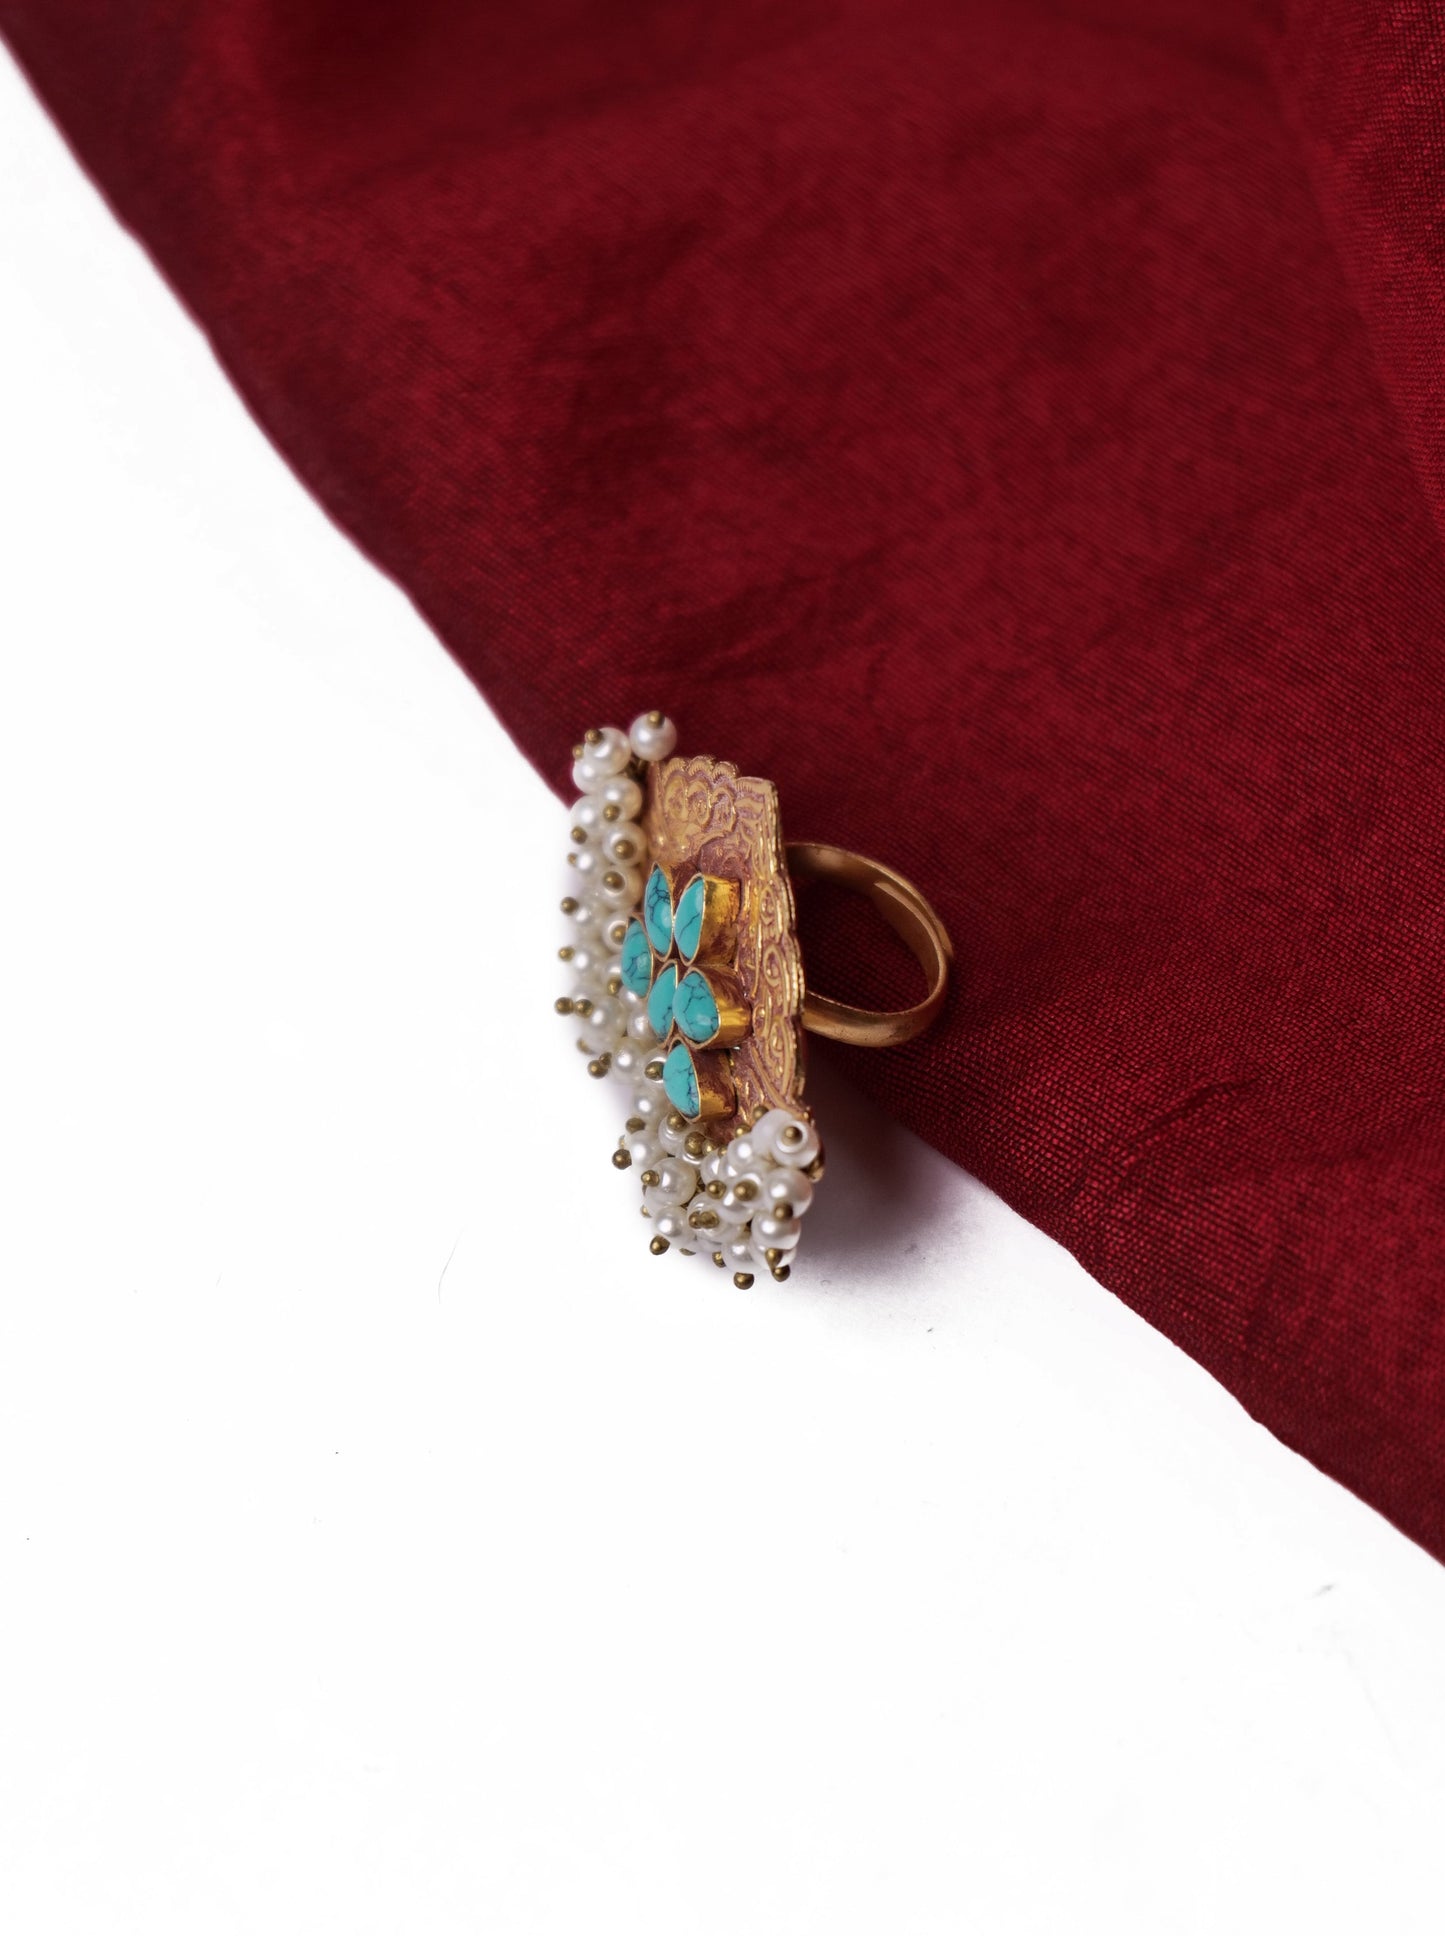 Antique gold ring with blue stone